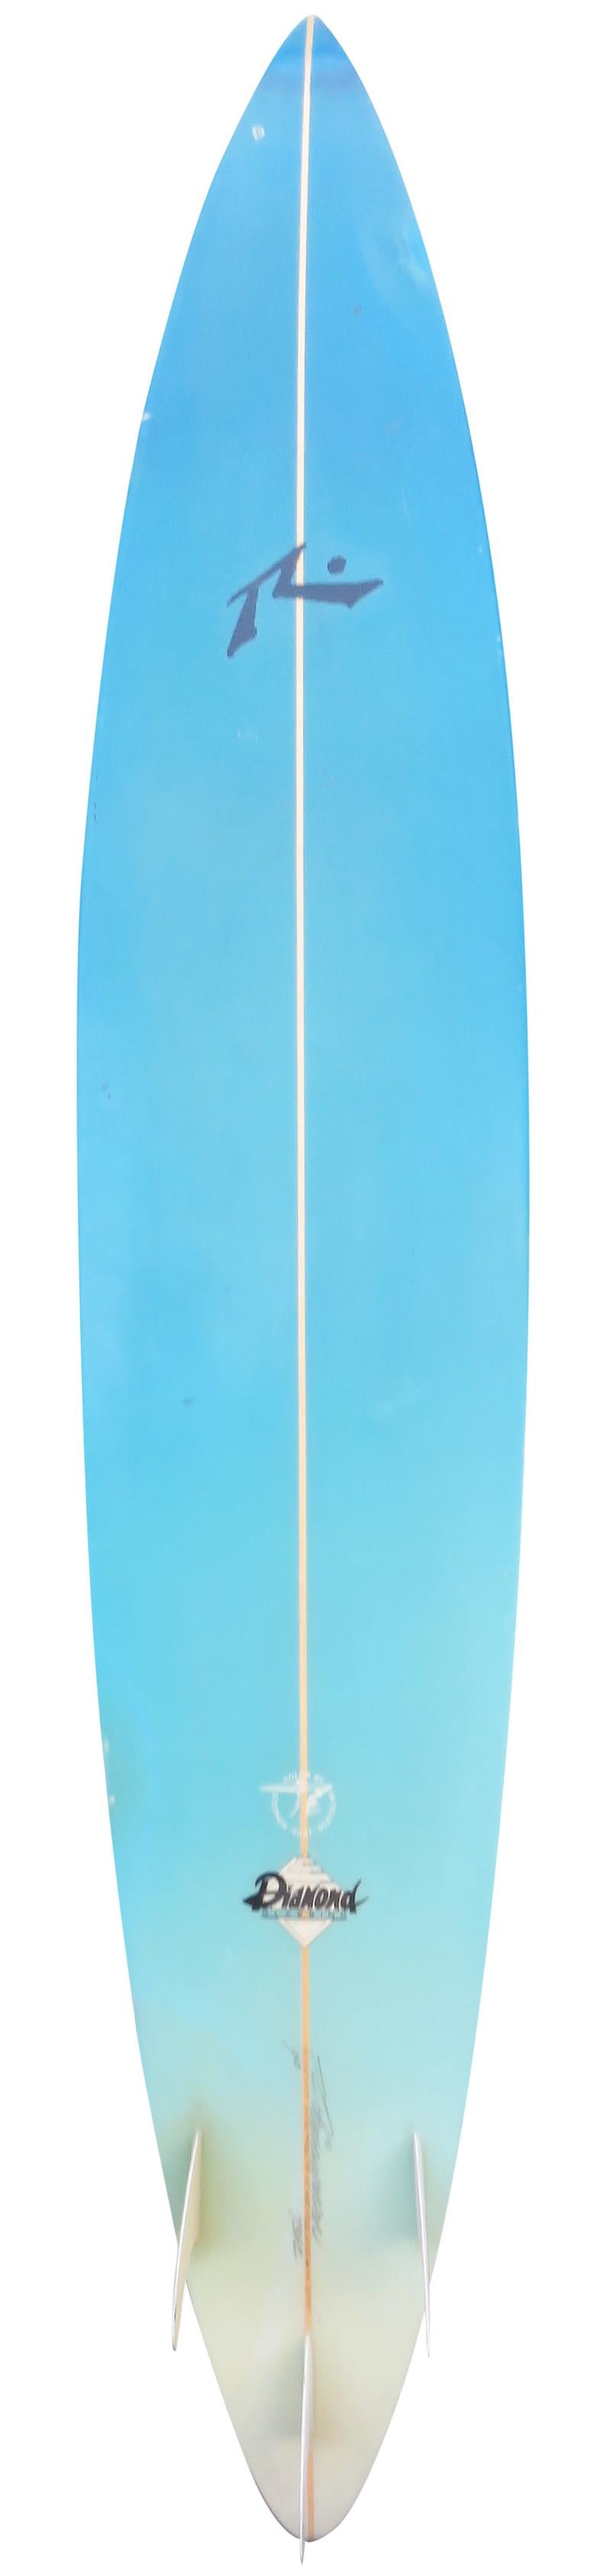 Vintage 1992 Rusty big wave surfboard shaped by Rusty Preisendorfer. Features a sky blue airbrush fade done by Stephen Scatolini and glassed on thruster (tri-fin) setup. This vintage surfboard remains in all original condition. 

Rusty